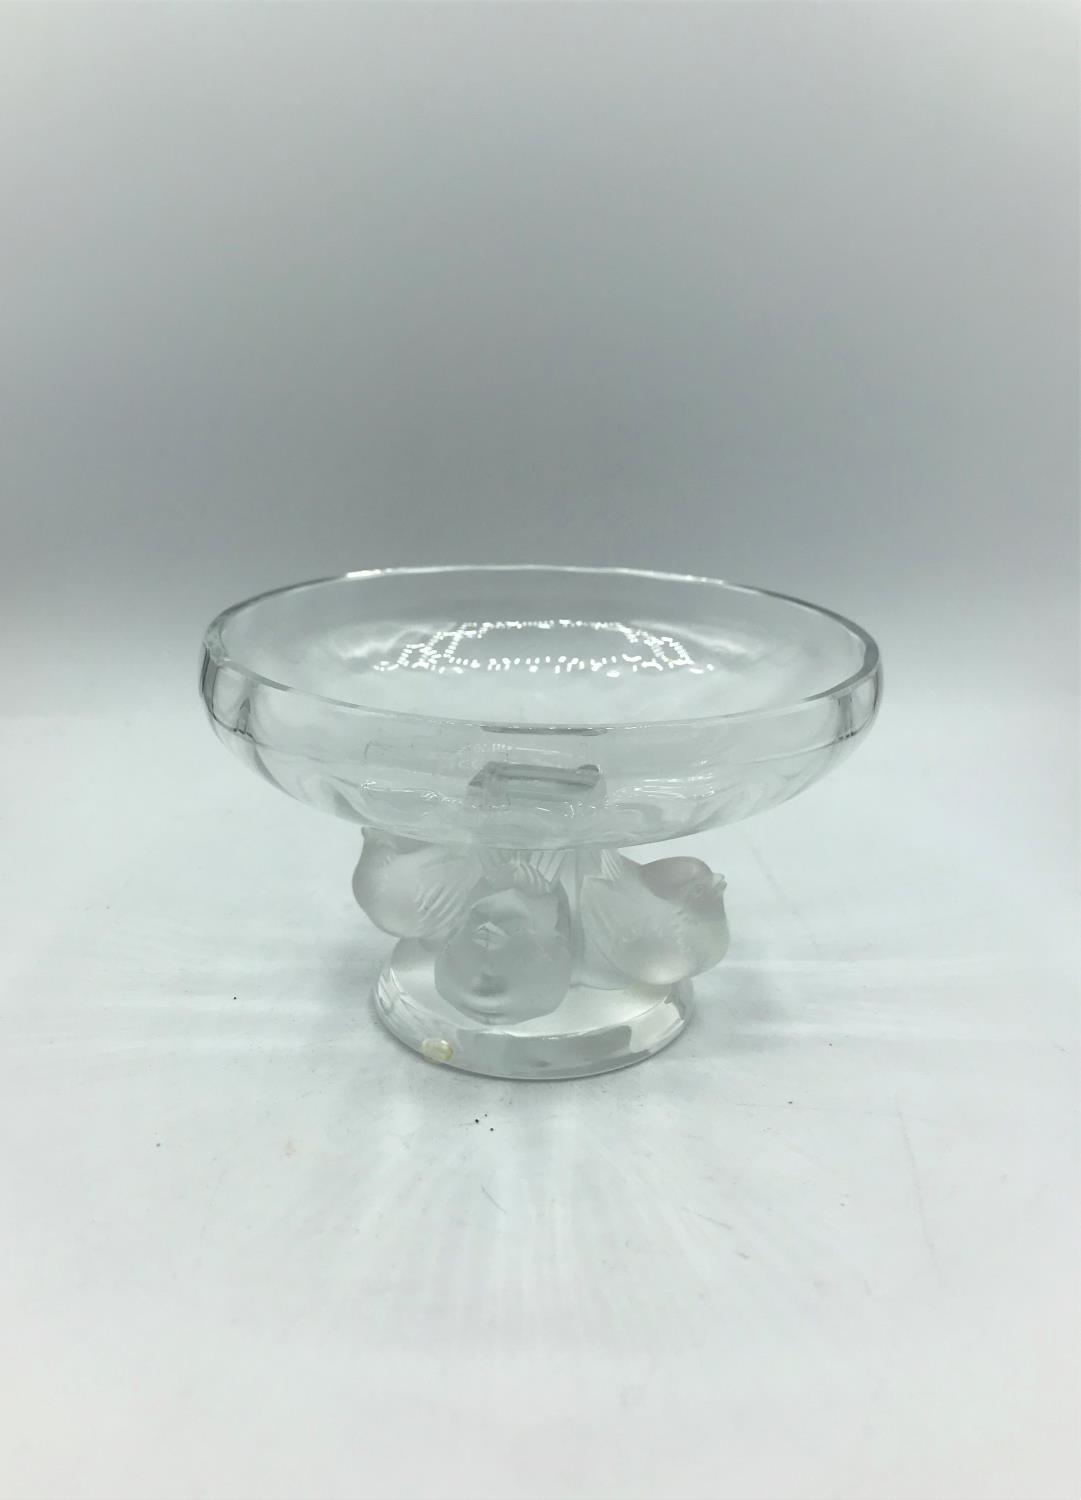 Lalique glass bowl (J0490) with 4 birds on stem and clear Lalique France marking, weight 592g and